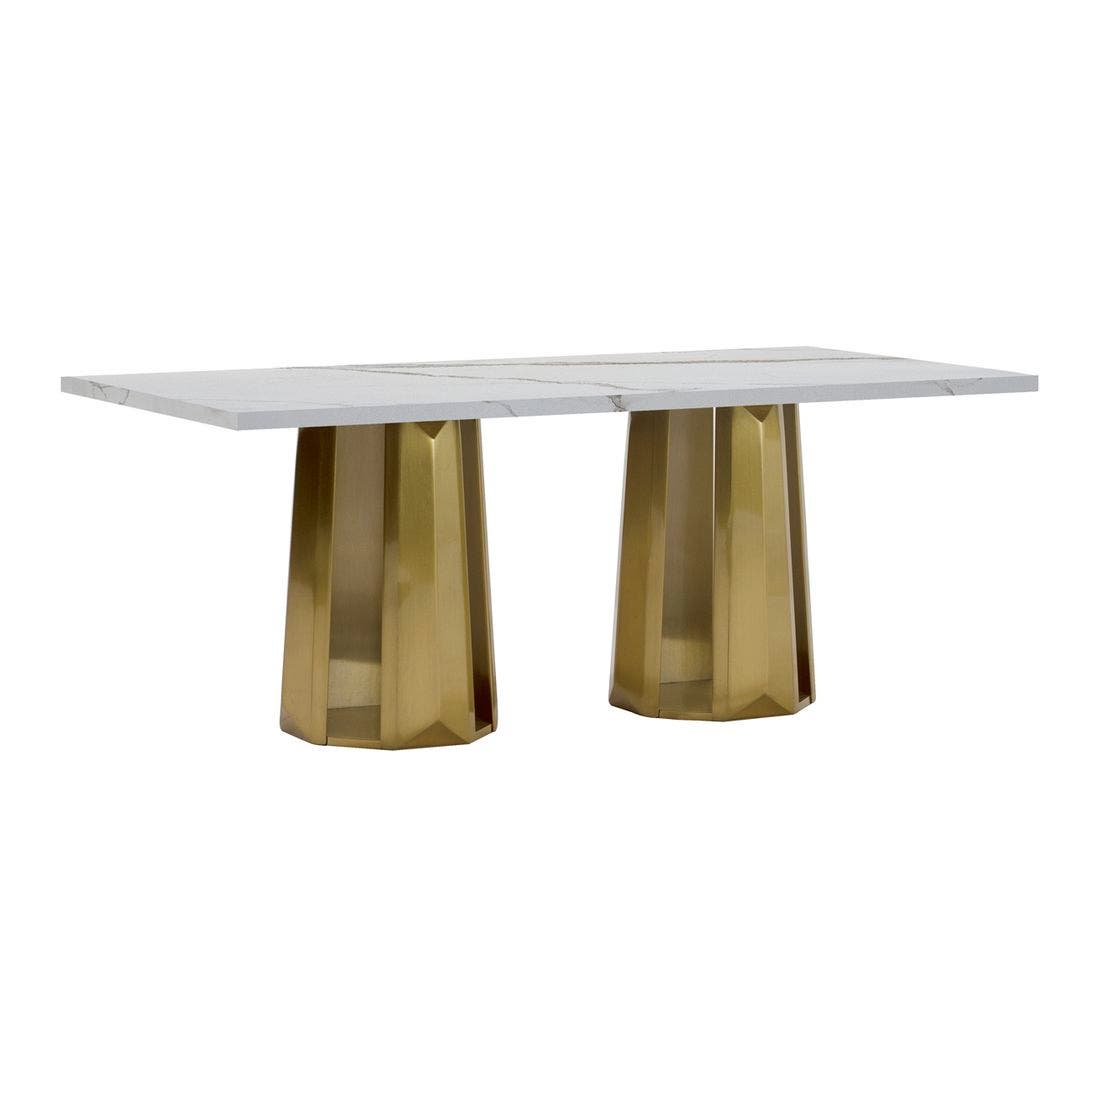 59021670-base-sb07m-furniture-dining-room-dining-tables-01